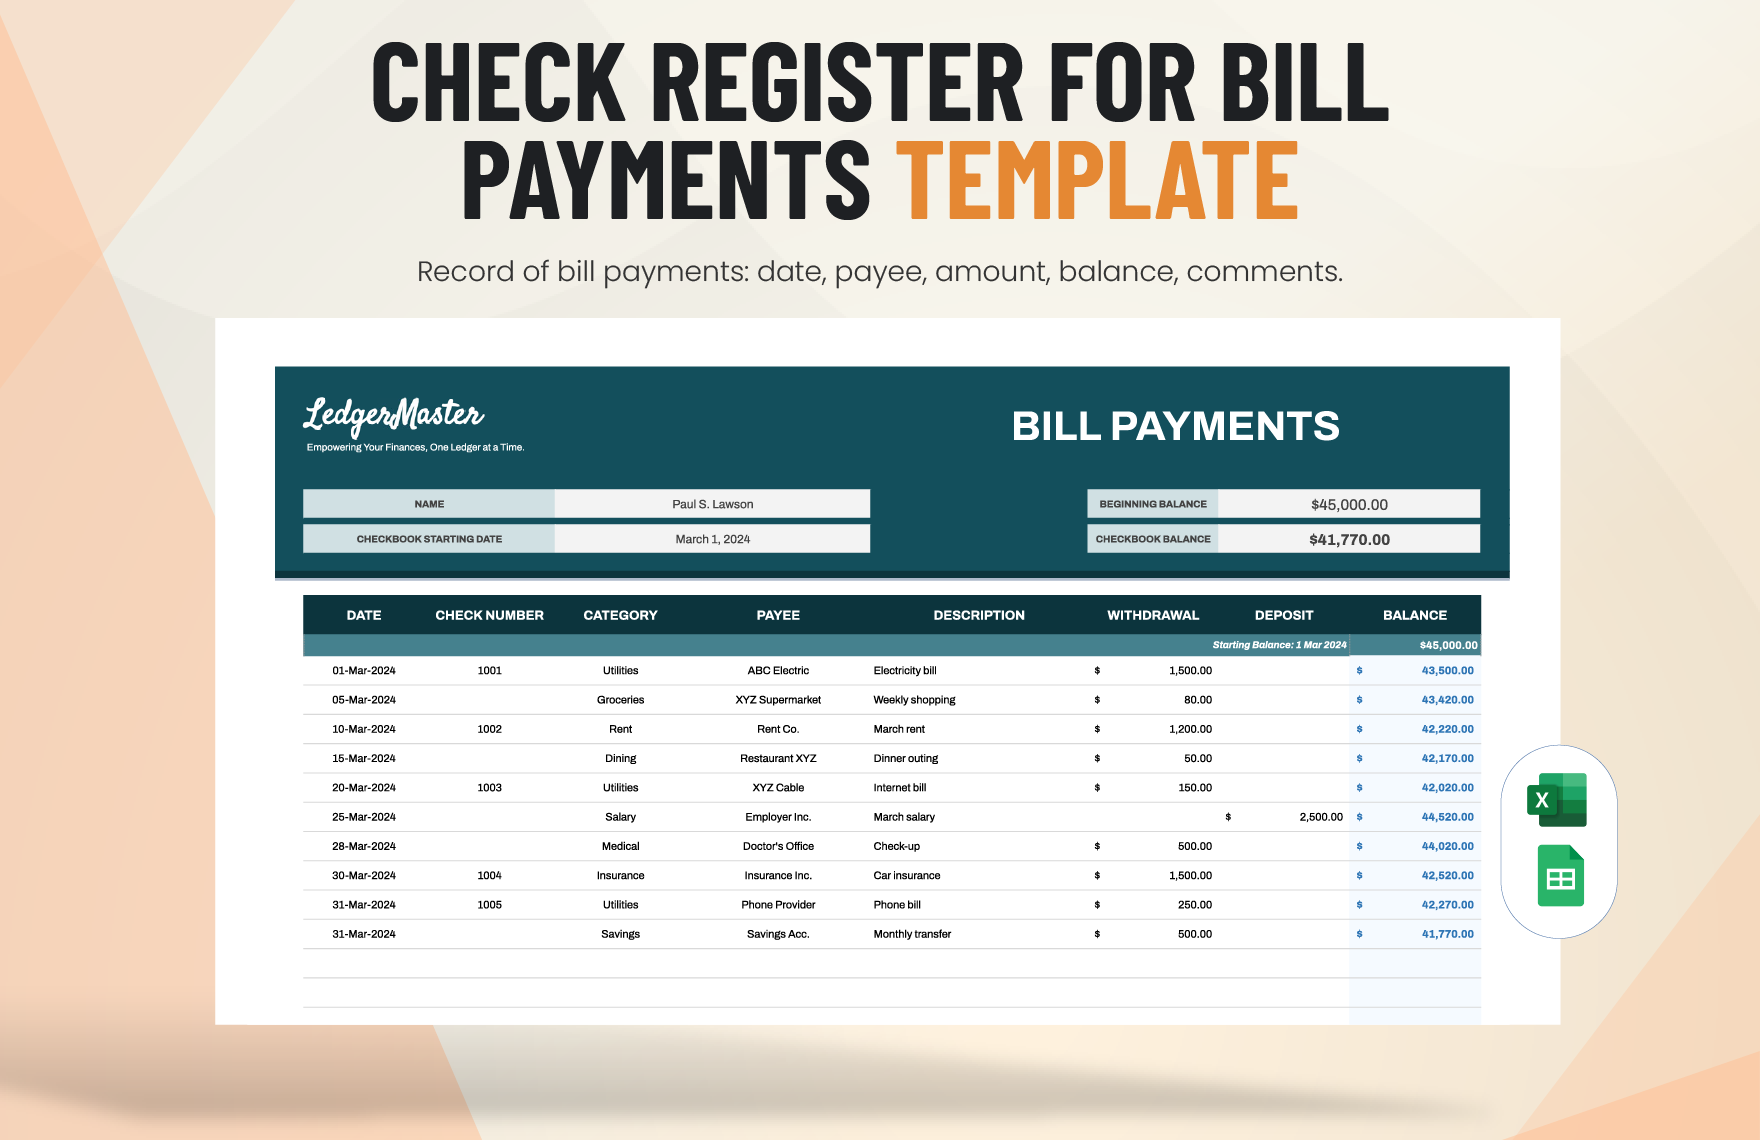 Check Register for Bill Payments Template in Excel, Google Sheets